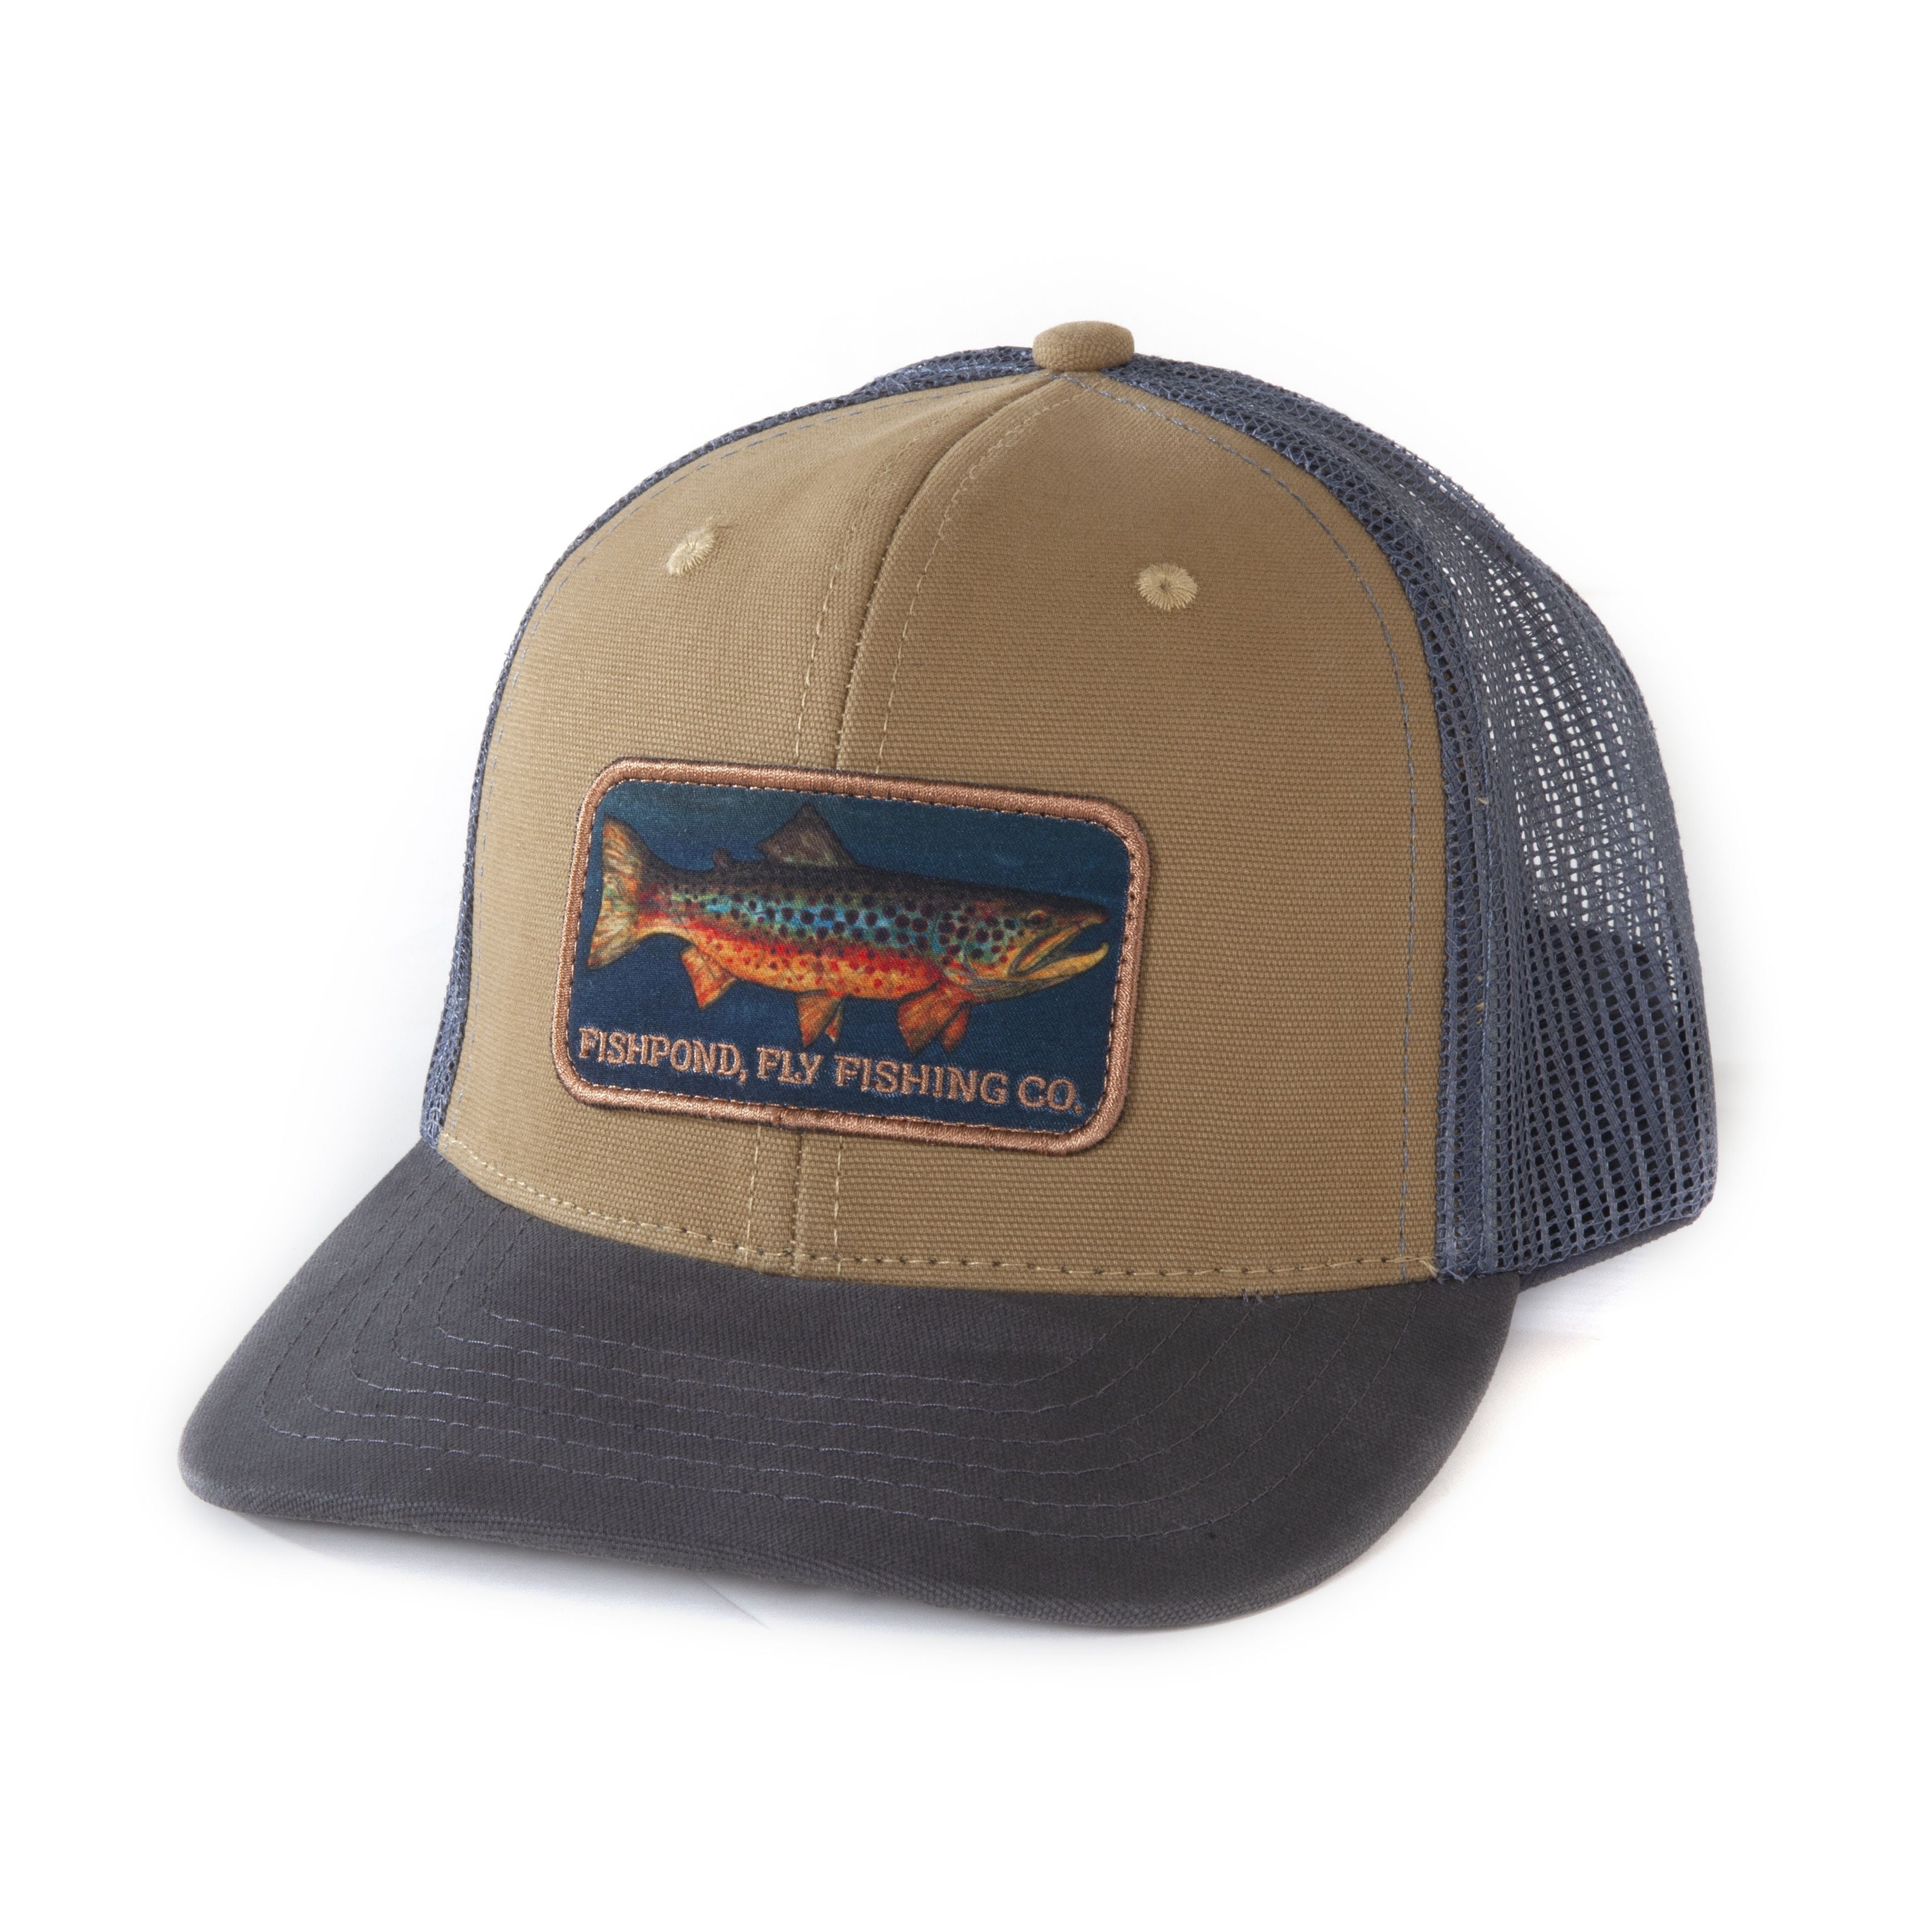 Fishpond / Local Hat